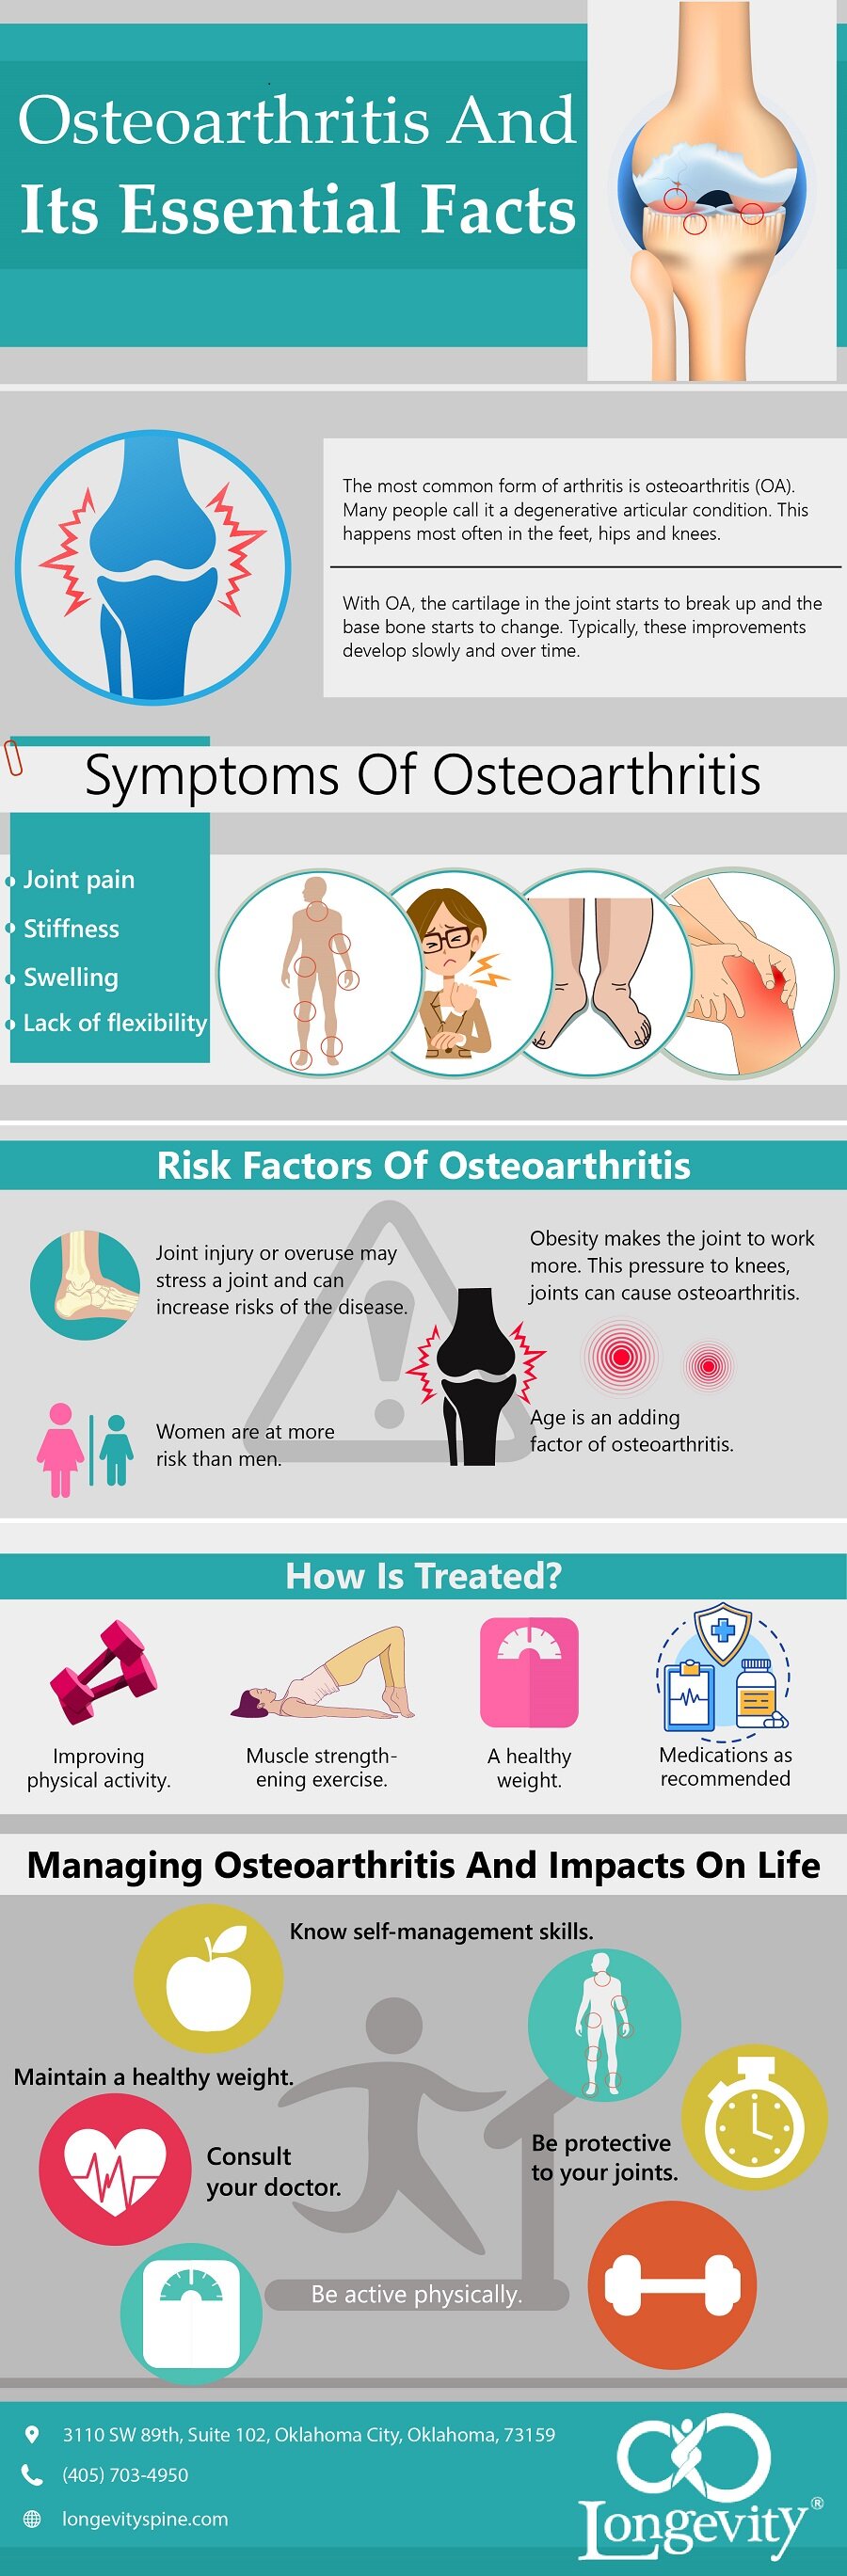 Osteoarthritis and Its Essential Facts